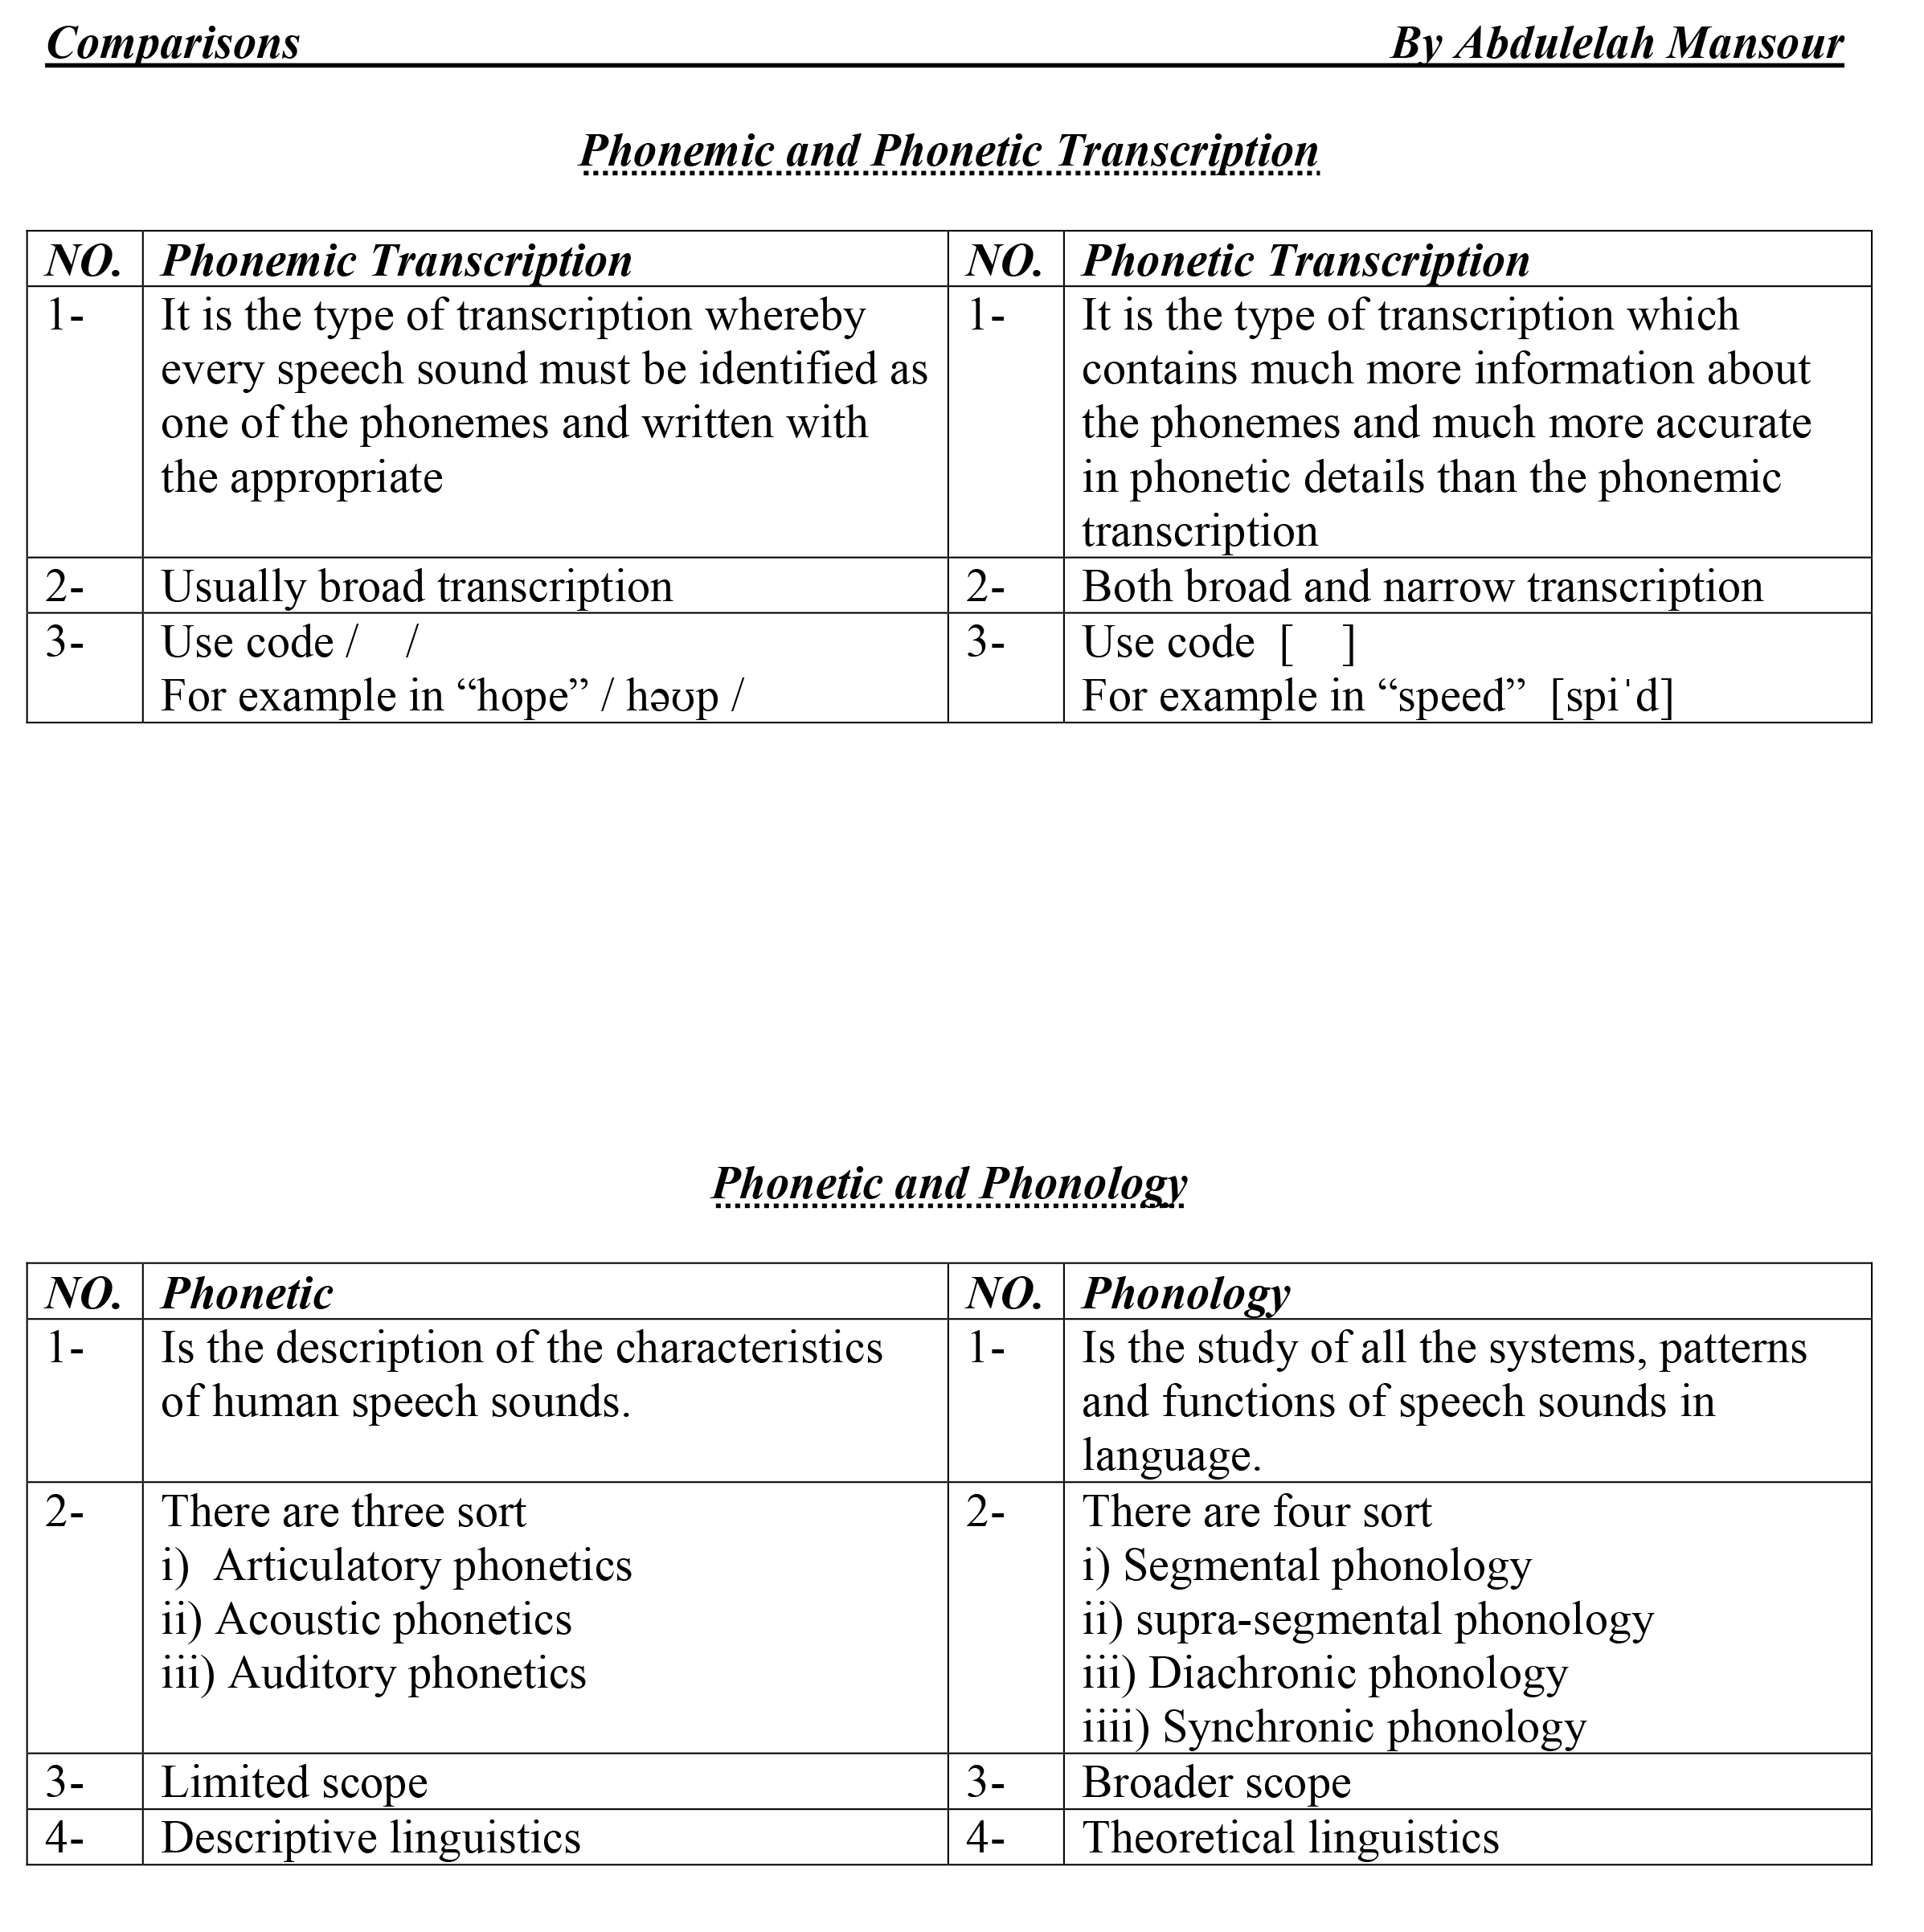 comparisons-phonemic-and-phonetic-transcription-phonetic-and